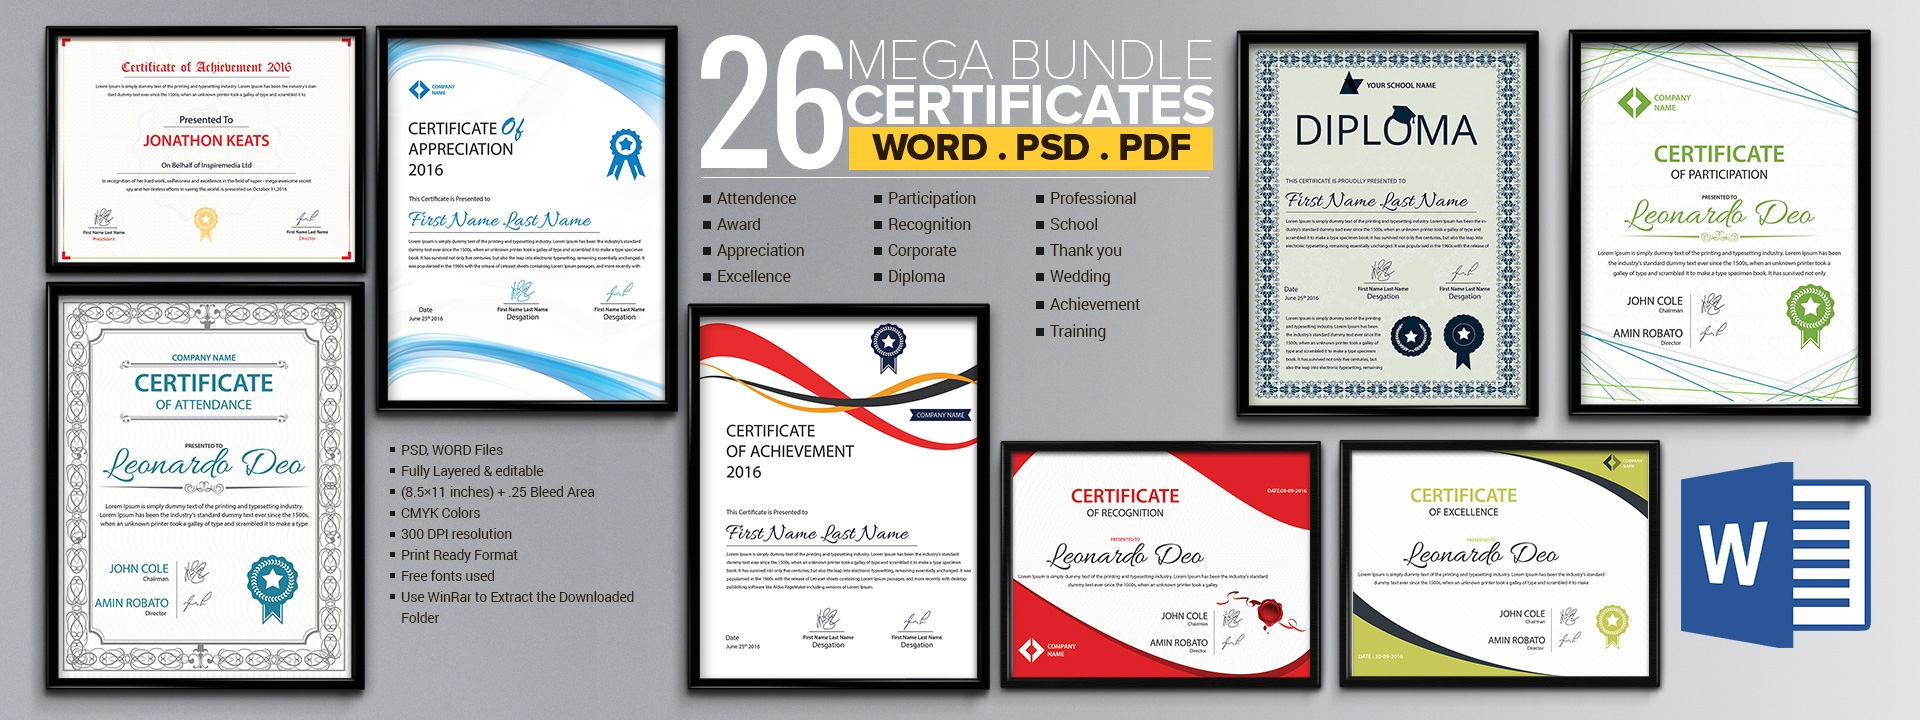 Word Certificate Template - 53+ Free Download Samples With Regard To Downloadable Certificate Templates For Microsoft Word